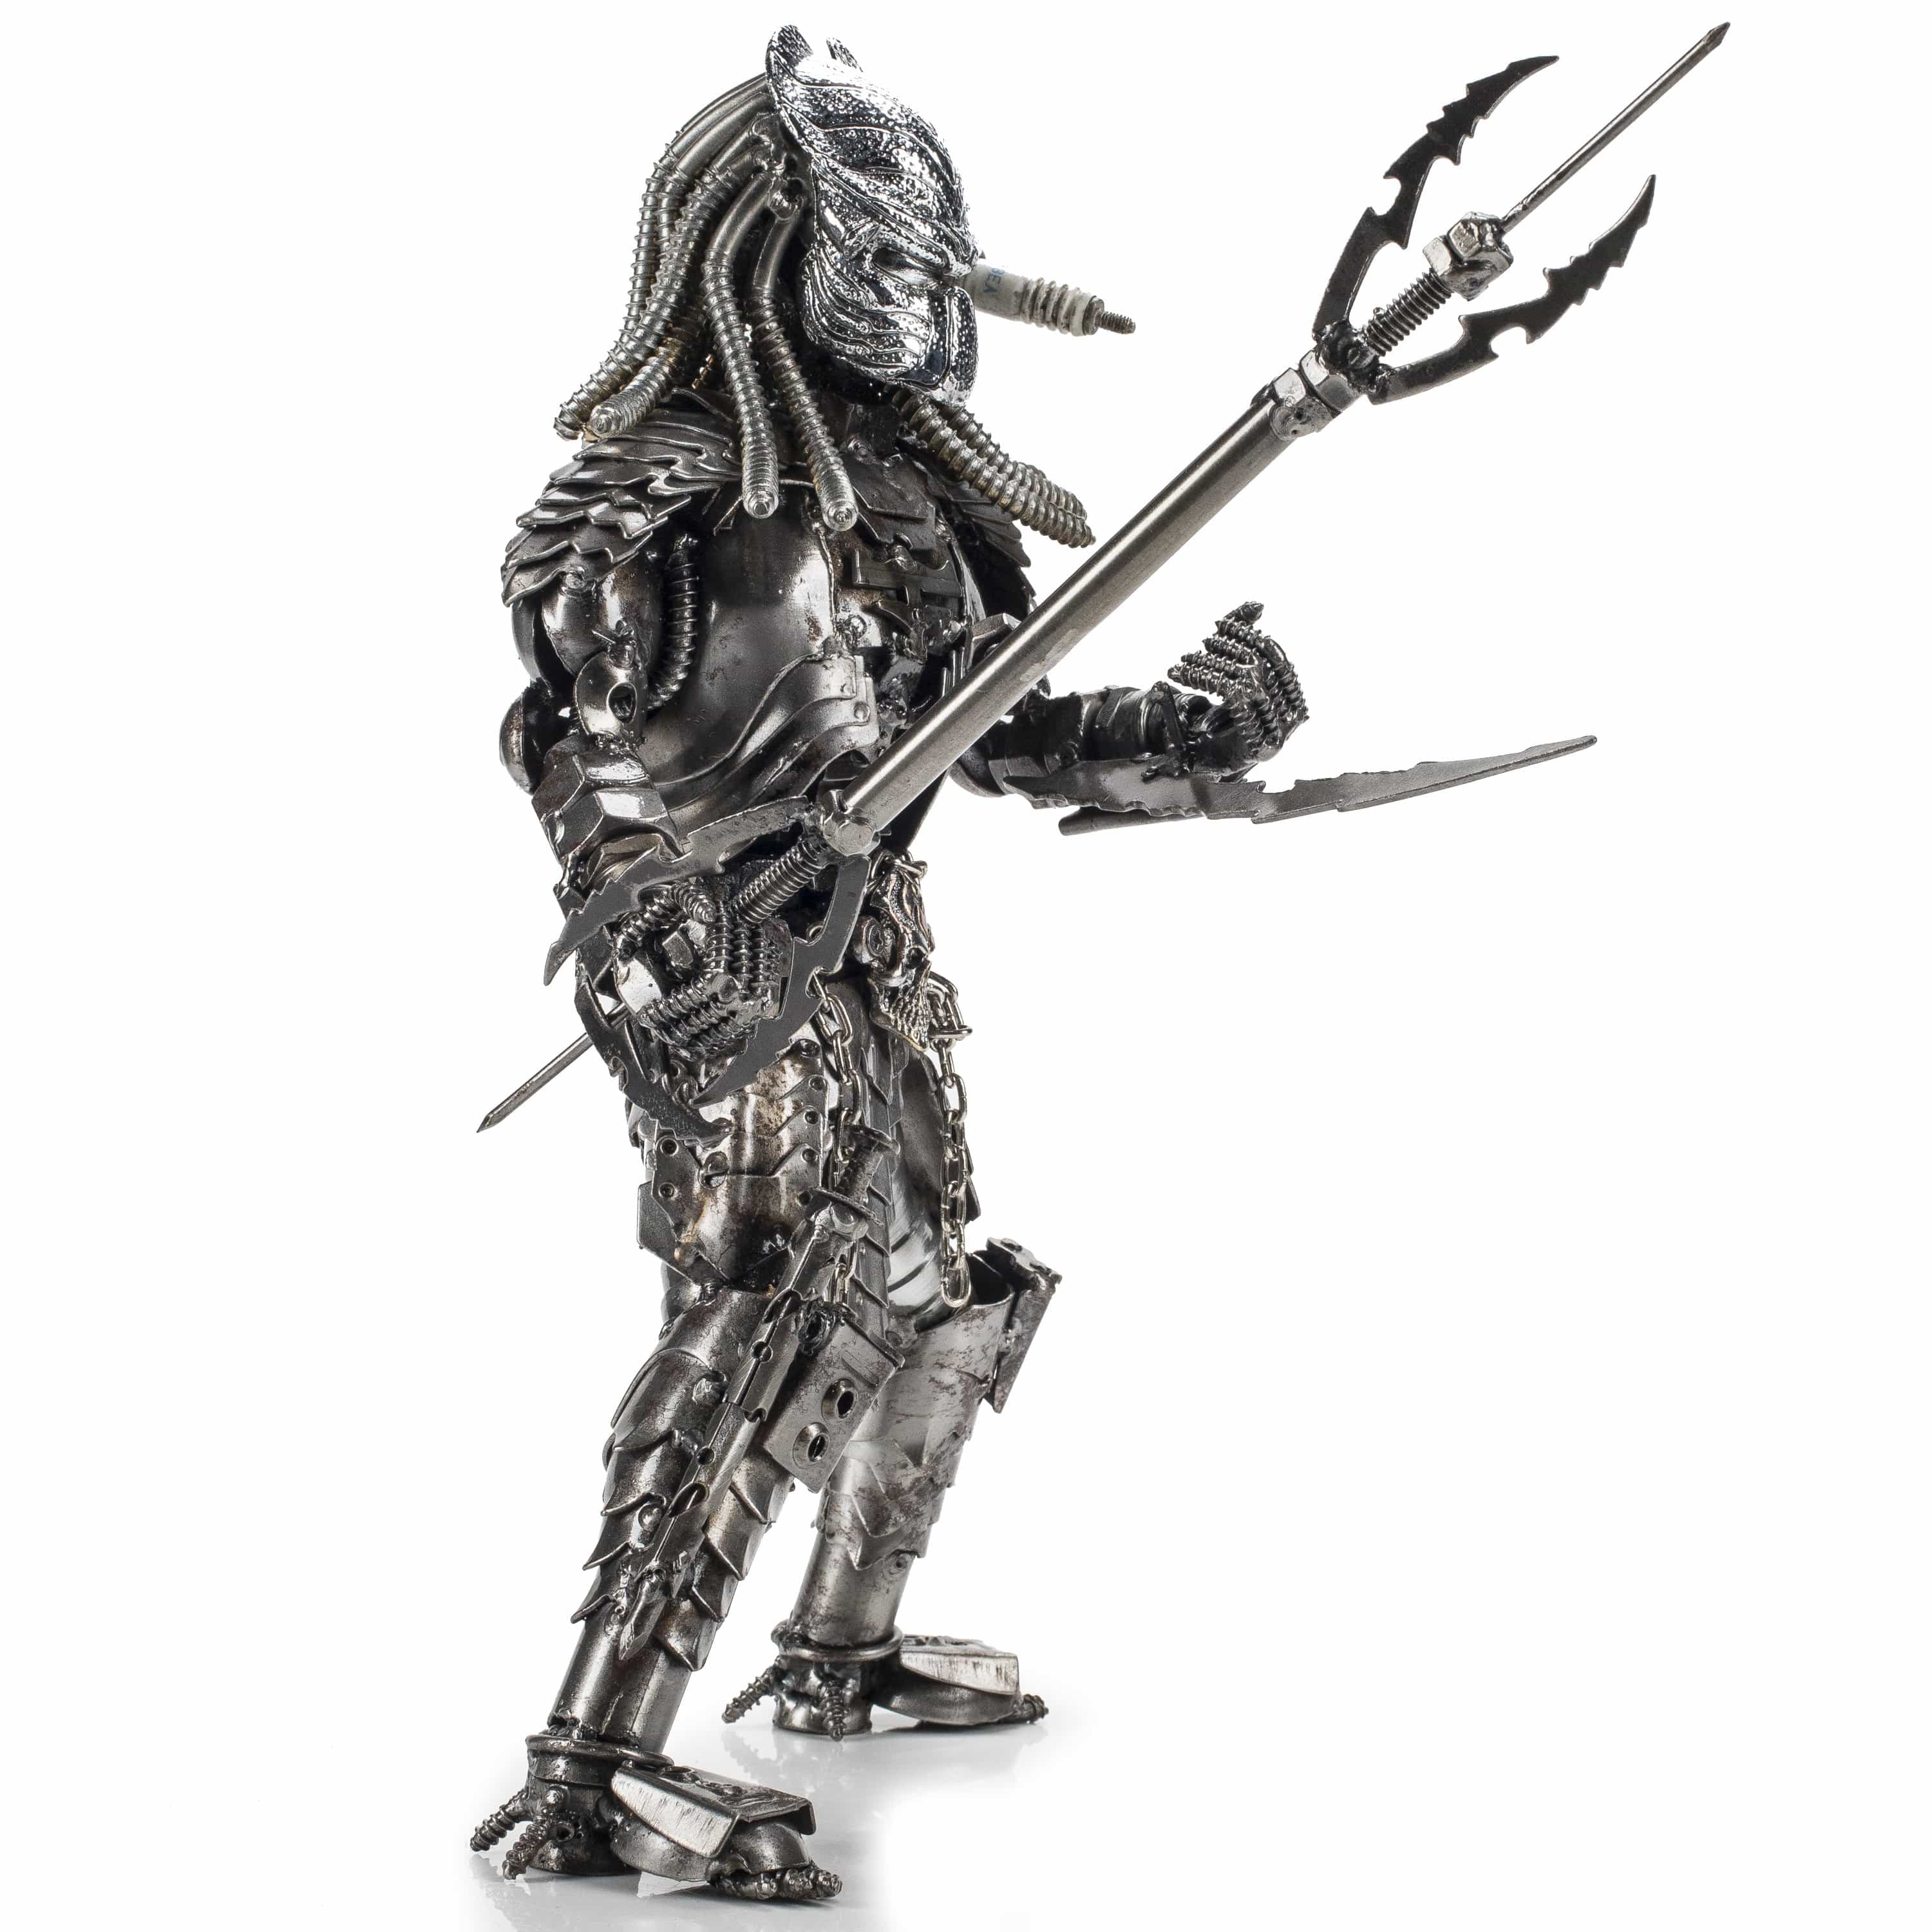 Kalifano Recycled Metal Art Predator with Brass Inspired Recycled Metal Sculpture RMS-1600PB-N